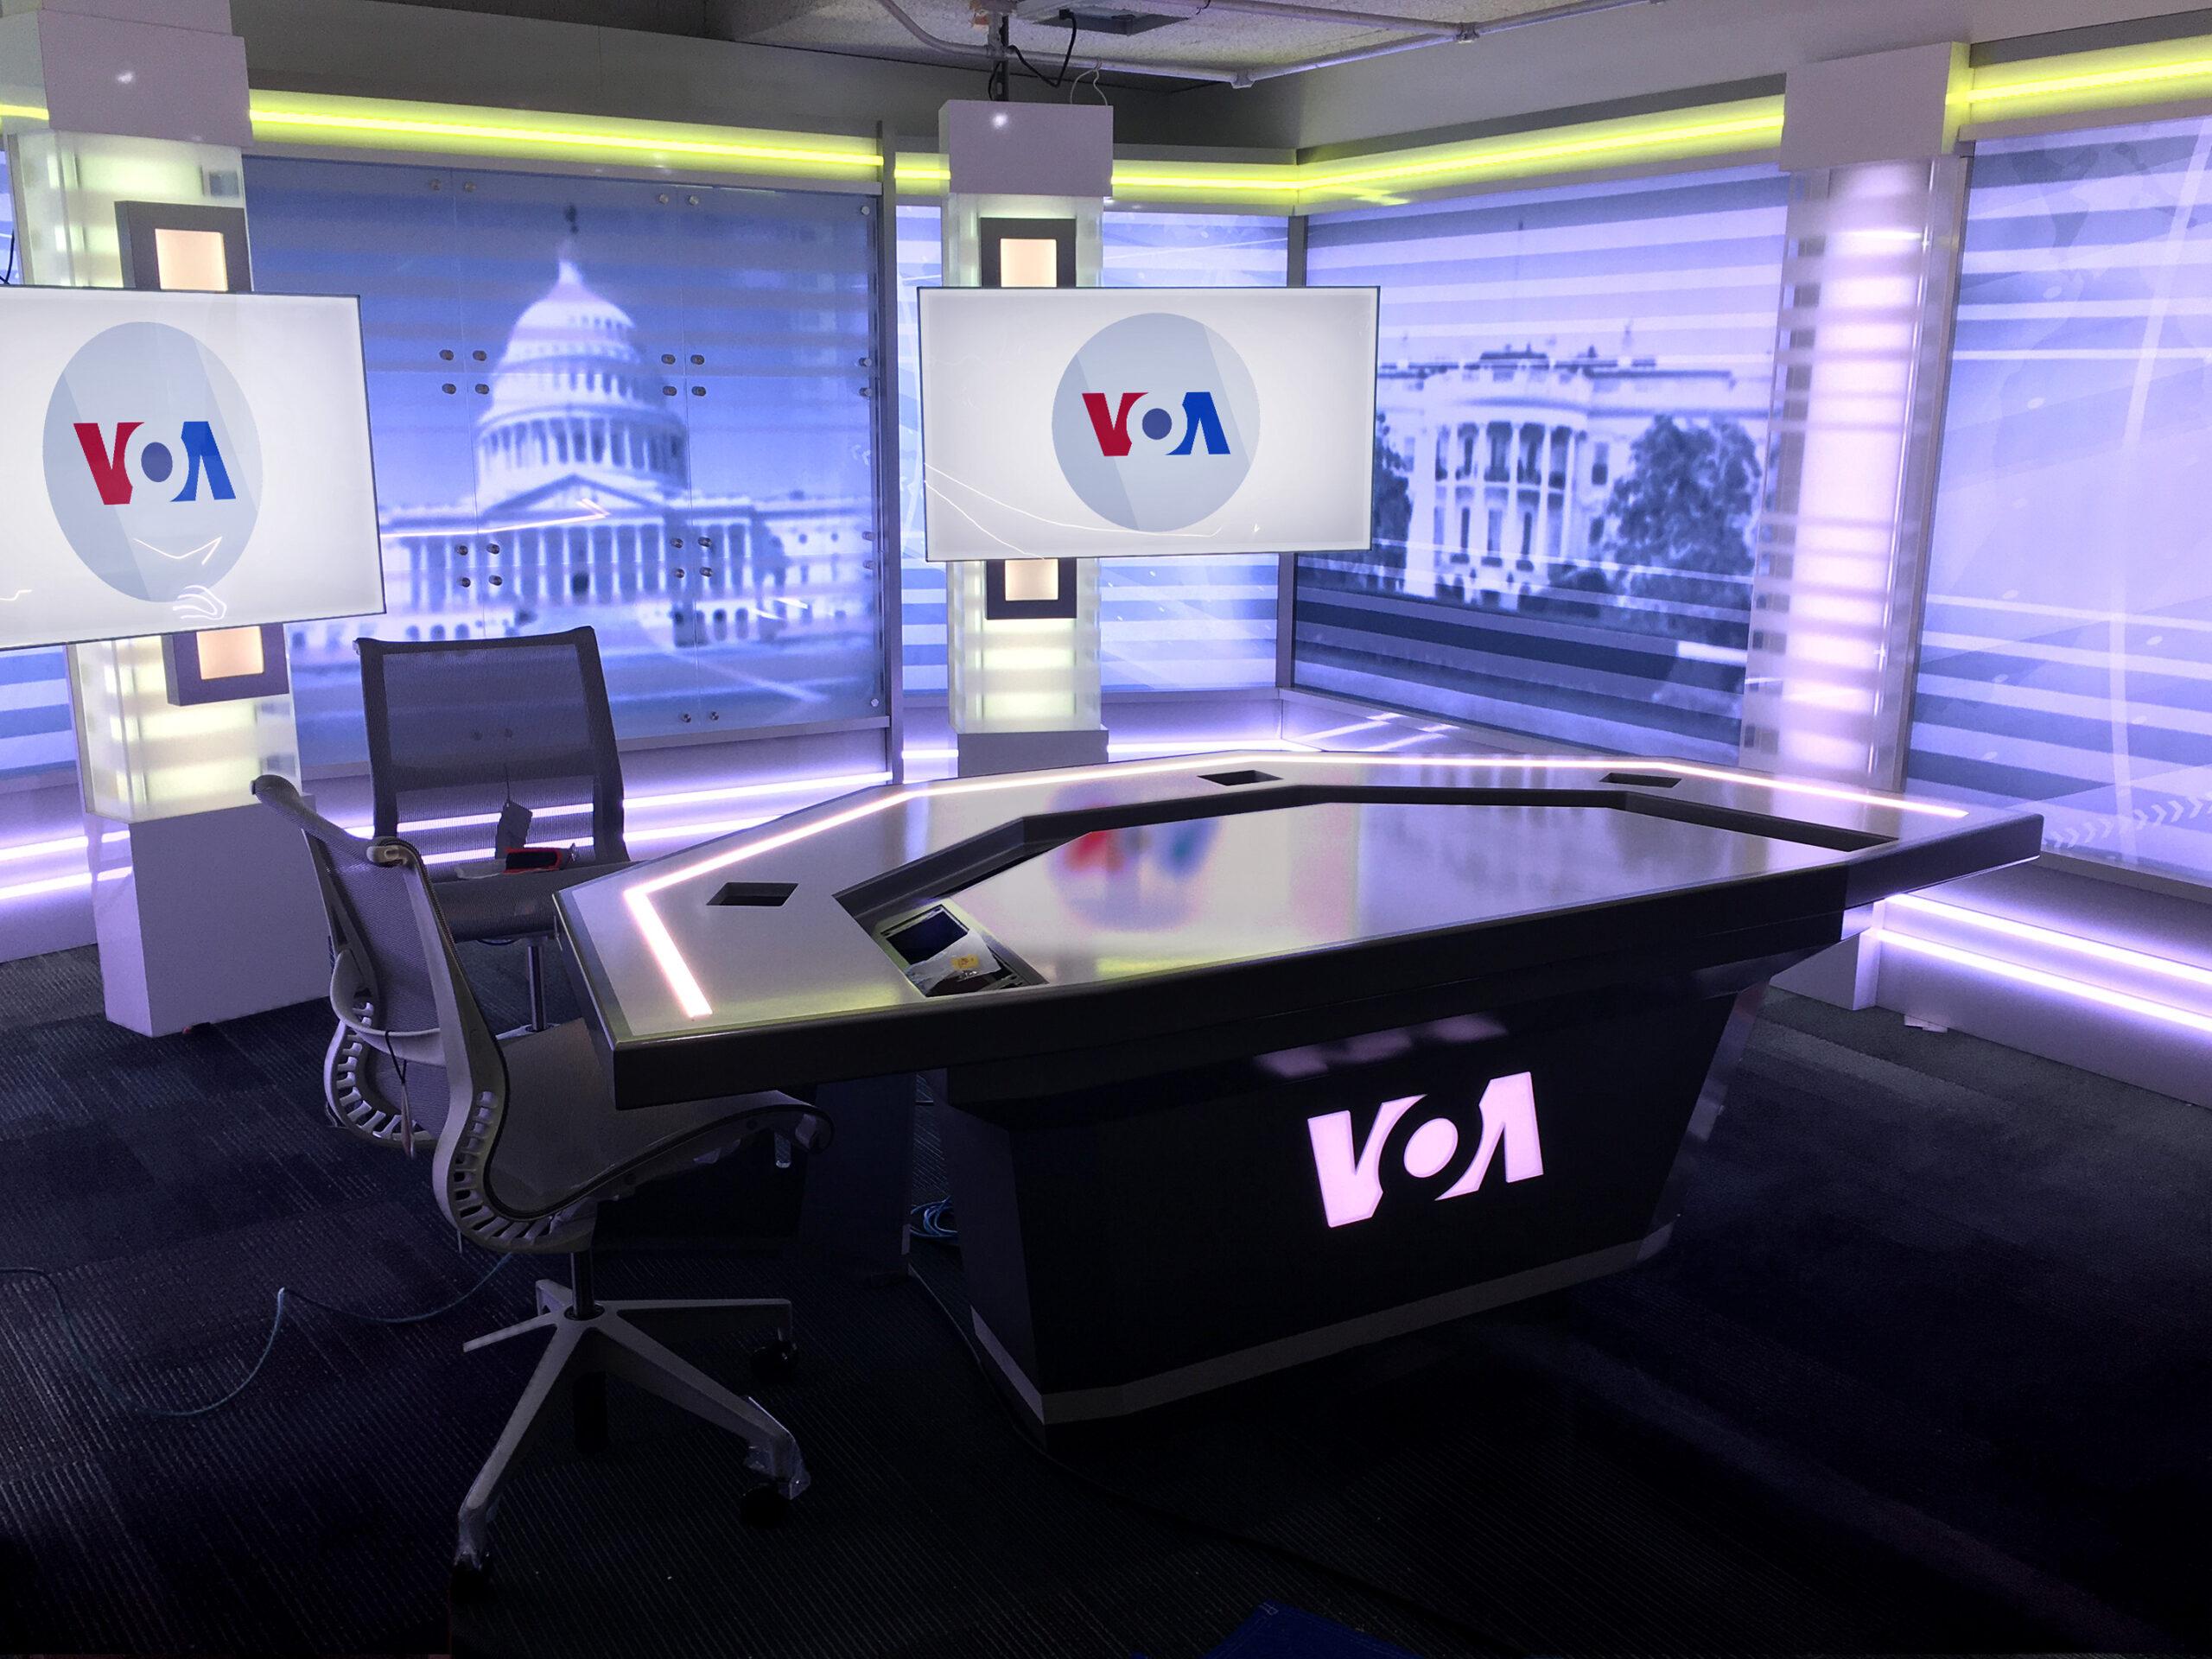 Product Voice of America - Studios 2 and 18 | Erector Sets Inc. image